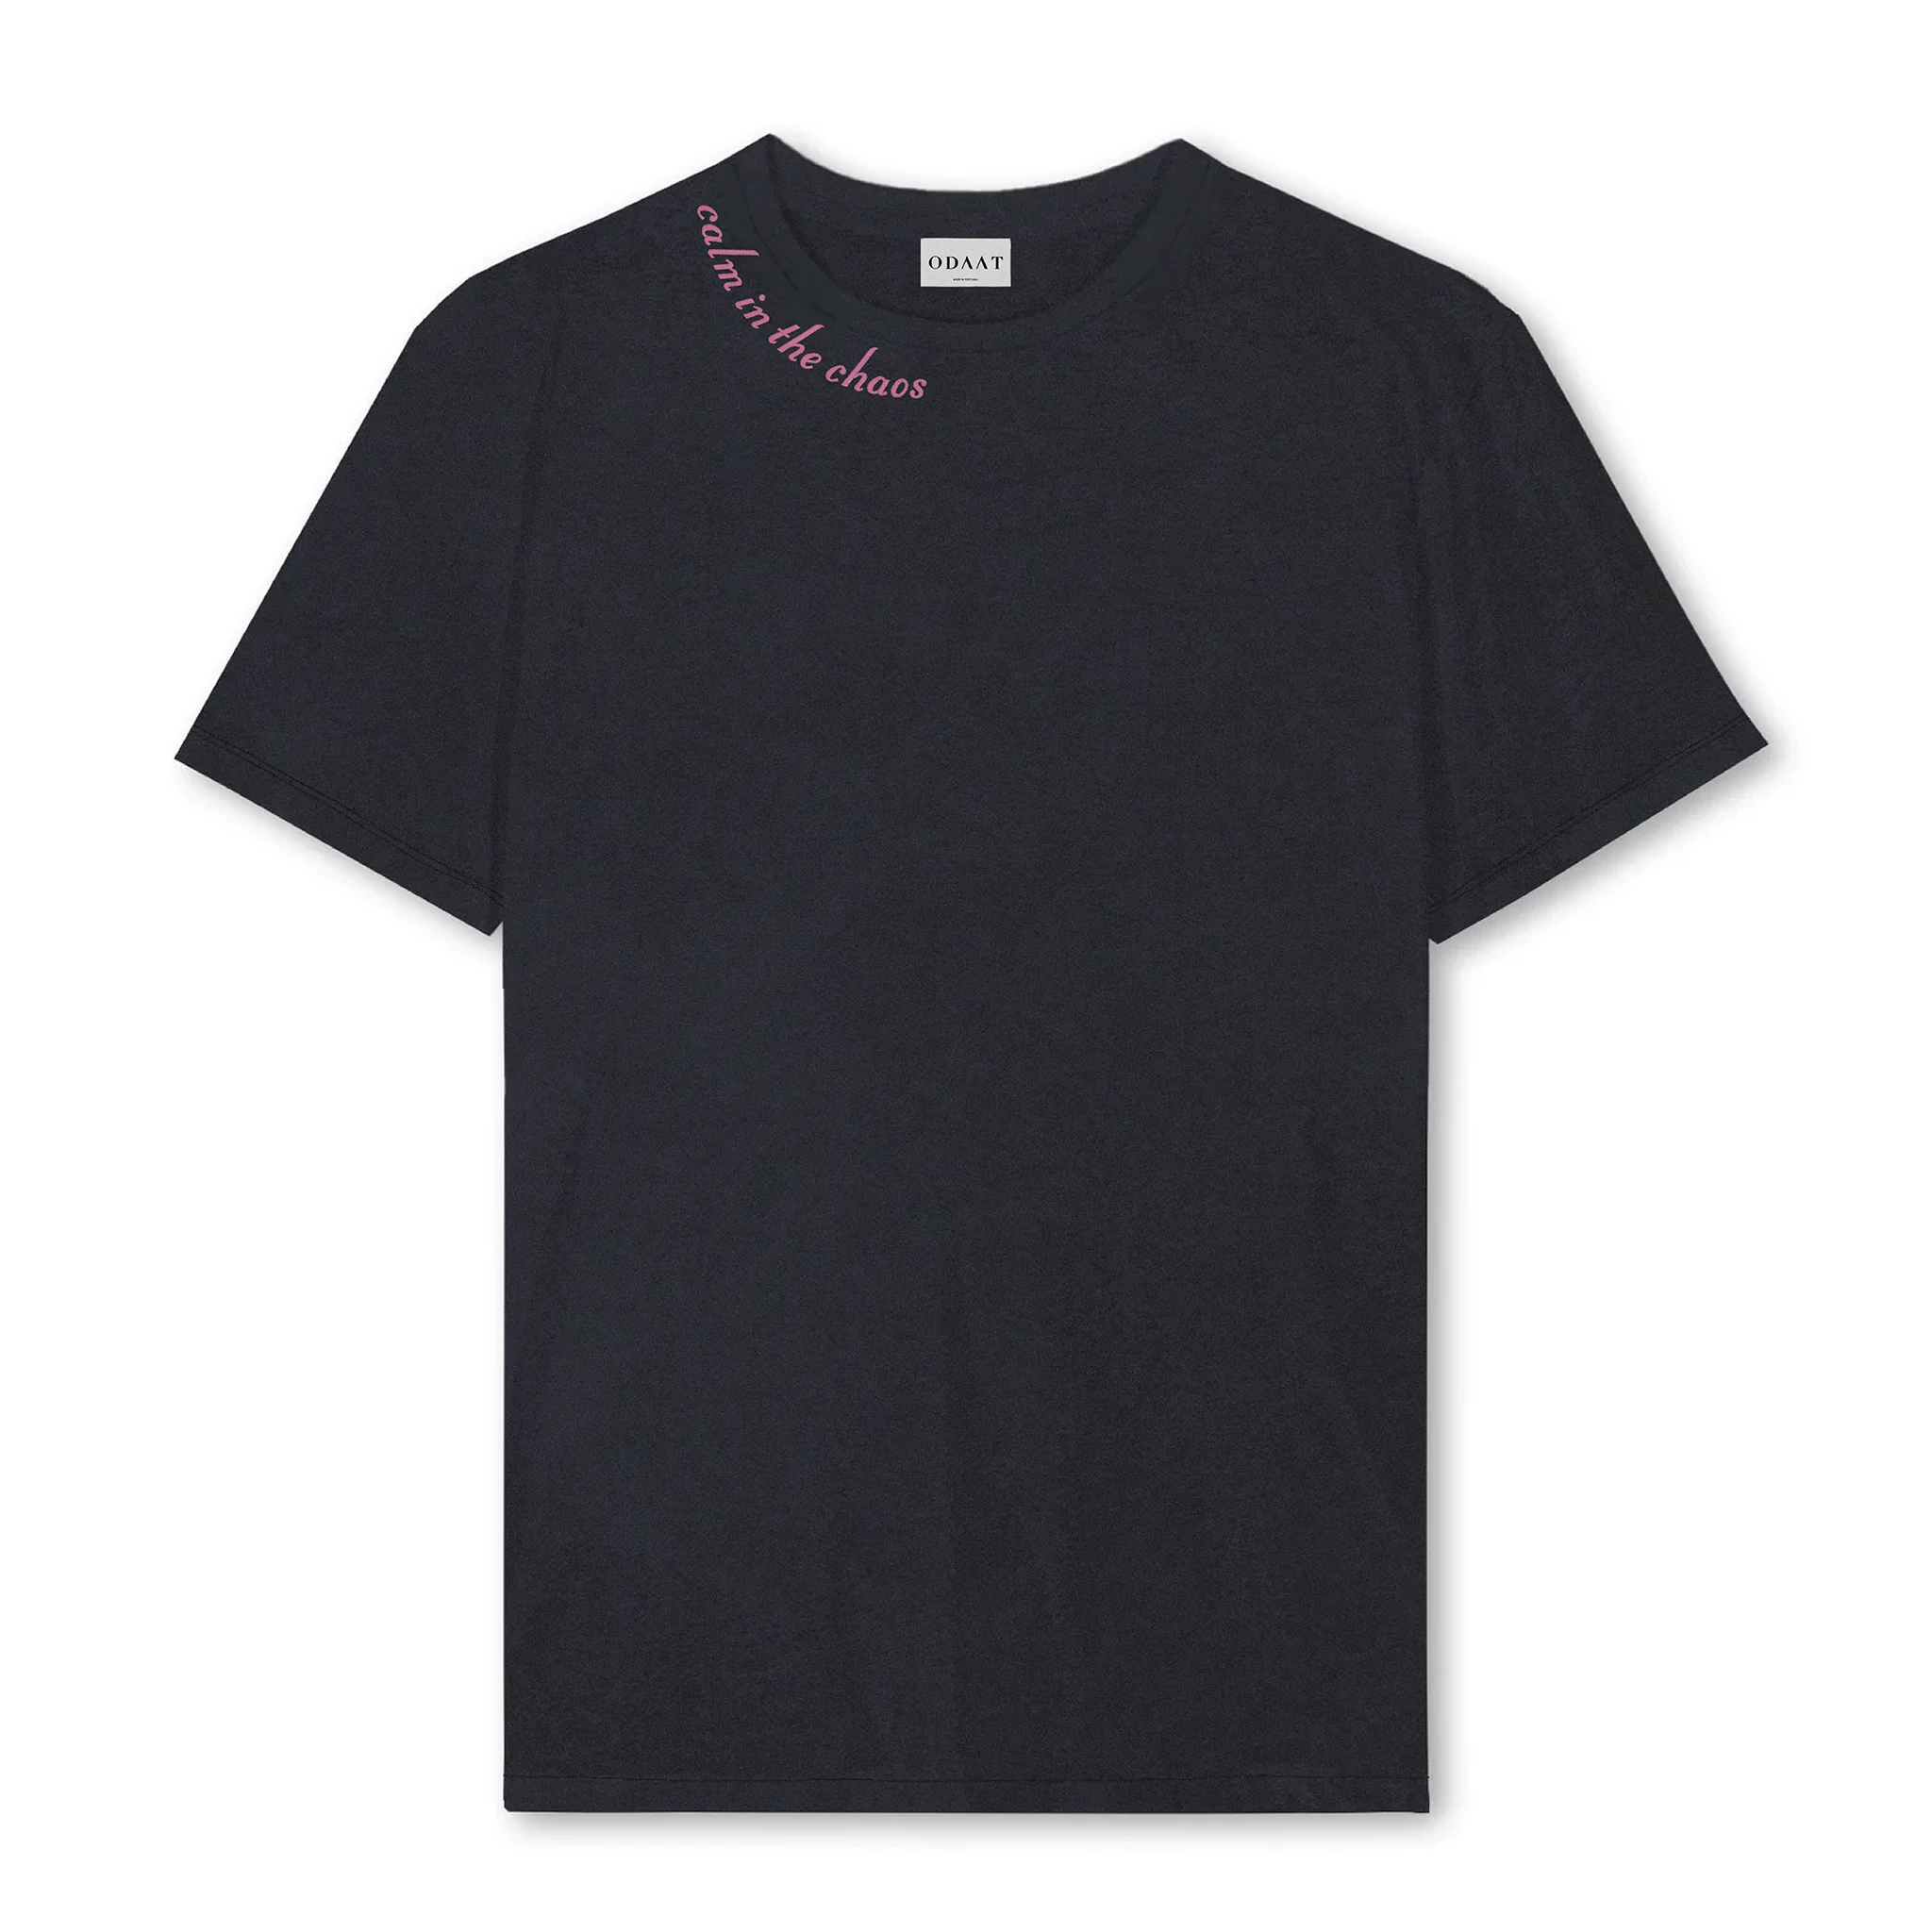 ODAAT Apparel, vintage black t-shirt with the words "calm in the chaos" embroidered on the neckline in pink. 